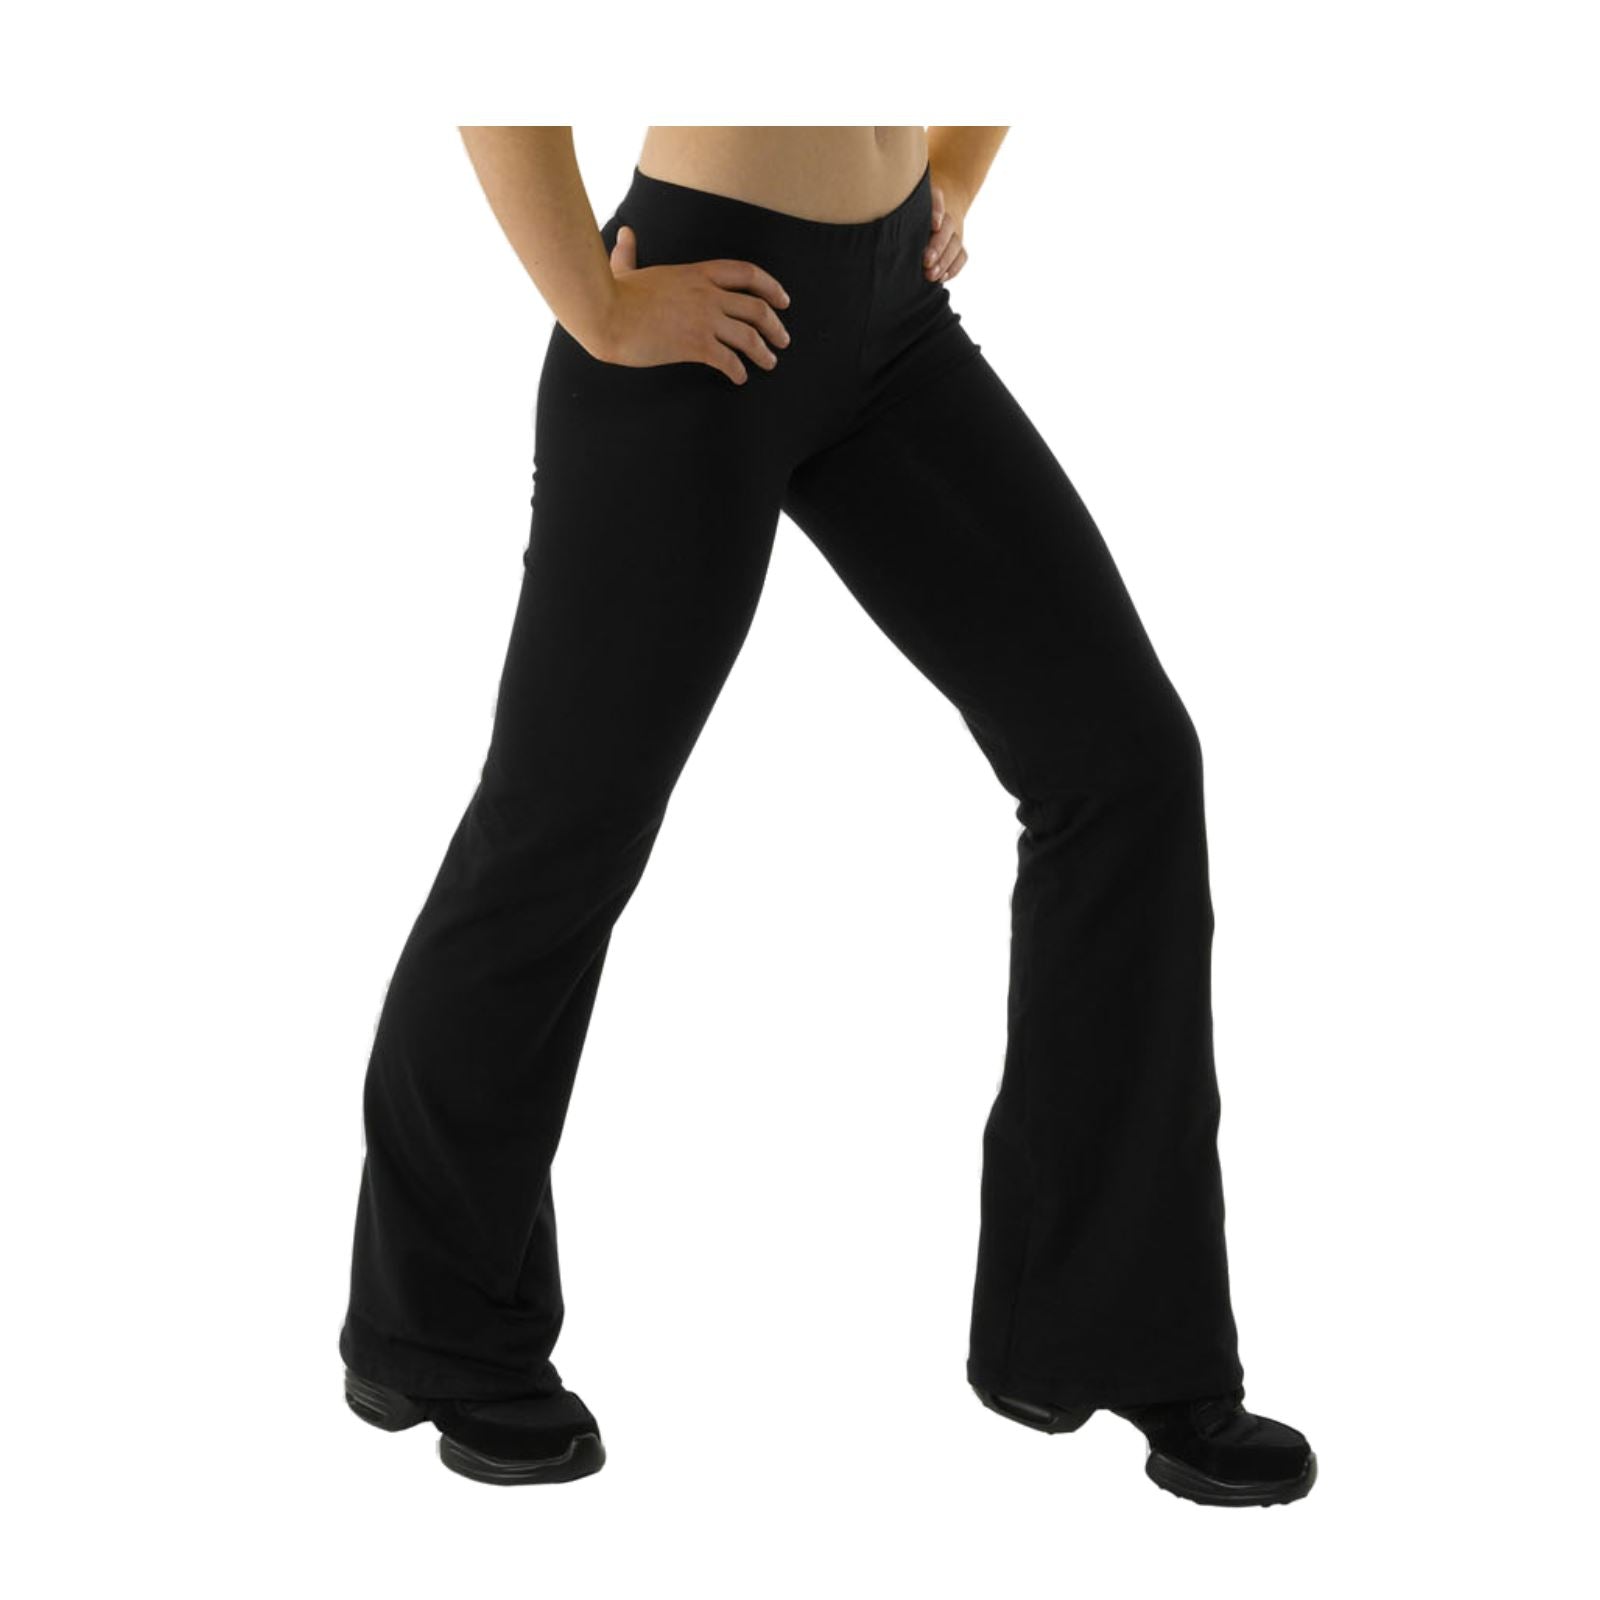 TAPPERS & POINTERS COTTON LYCRA HIPSTER JAZZ PANTS - FLARED LEG Dancewear Tappers and Pointers 